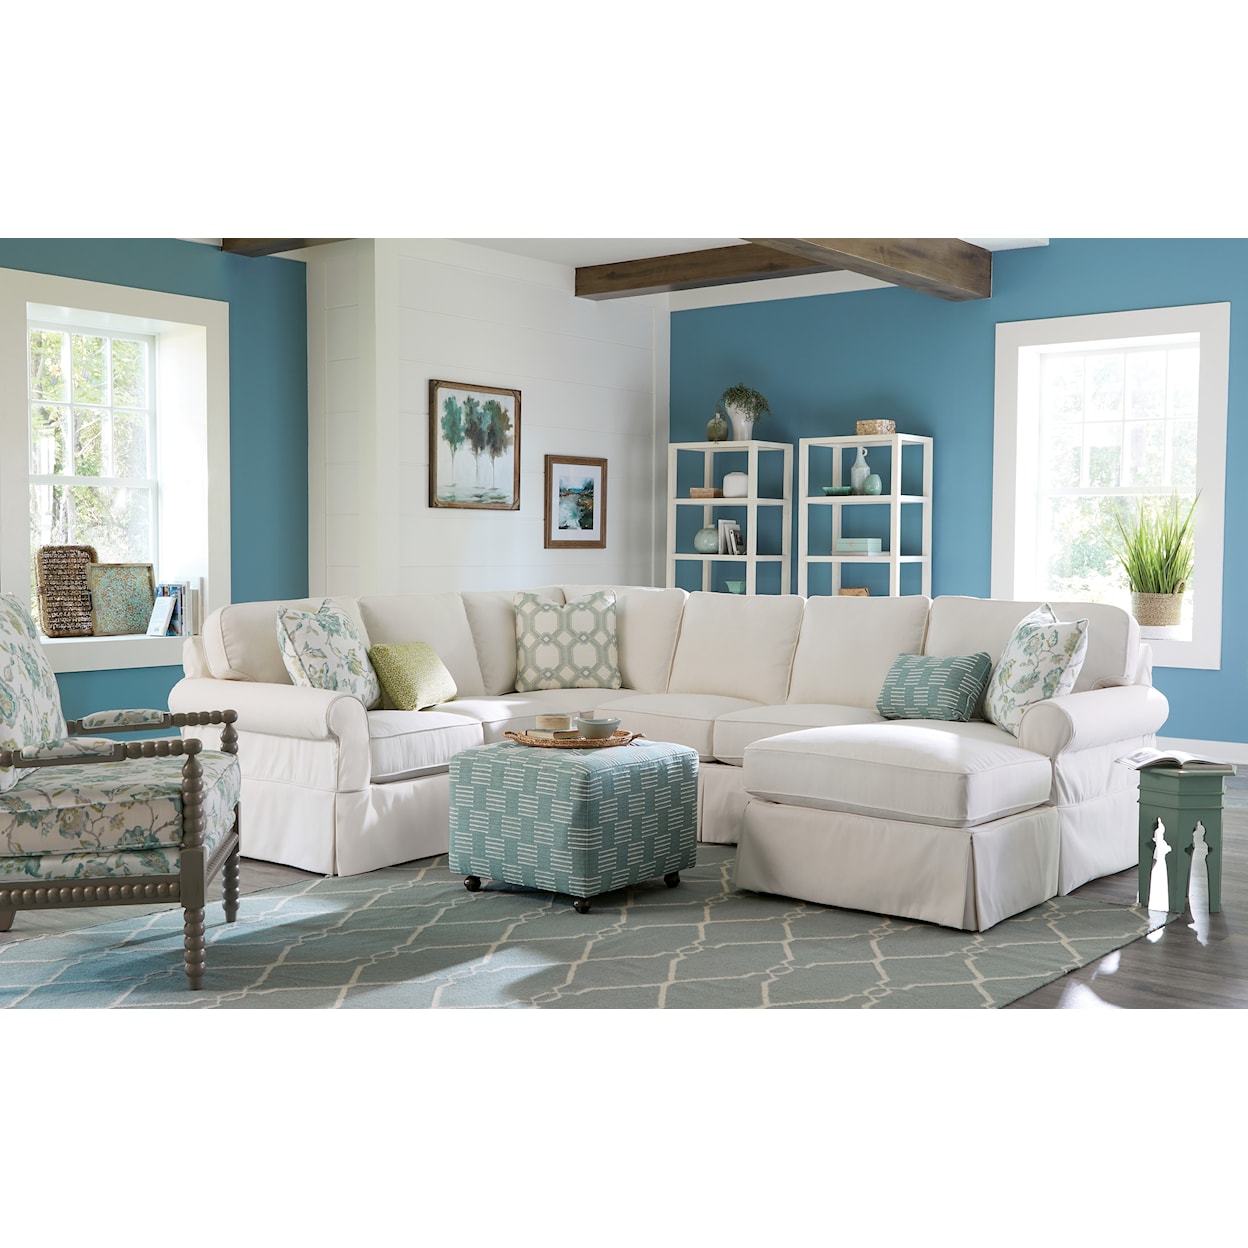 Hickorycraft 917450BD 3-Pc Slipcover Sectional Sofa w/ RAF Chaise